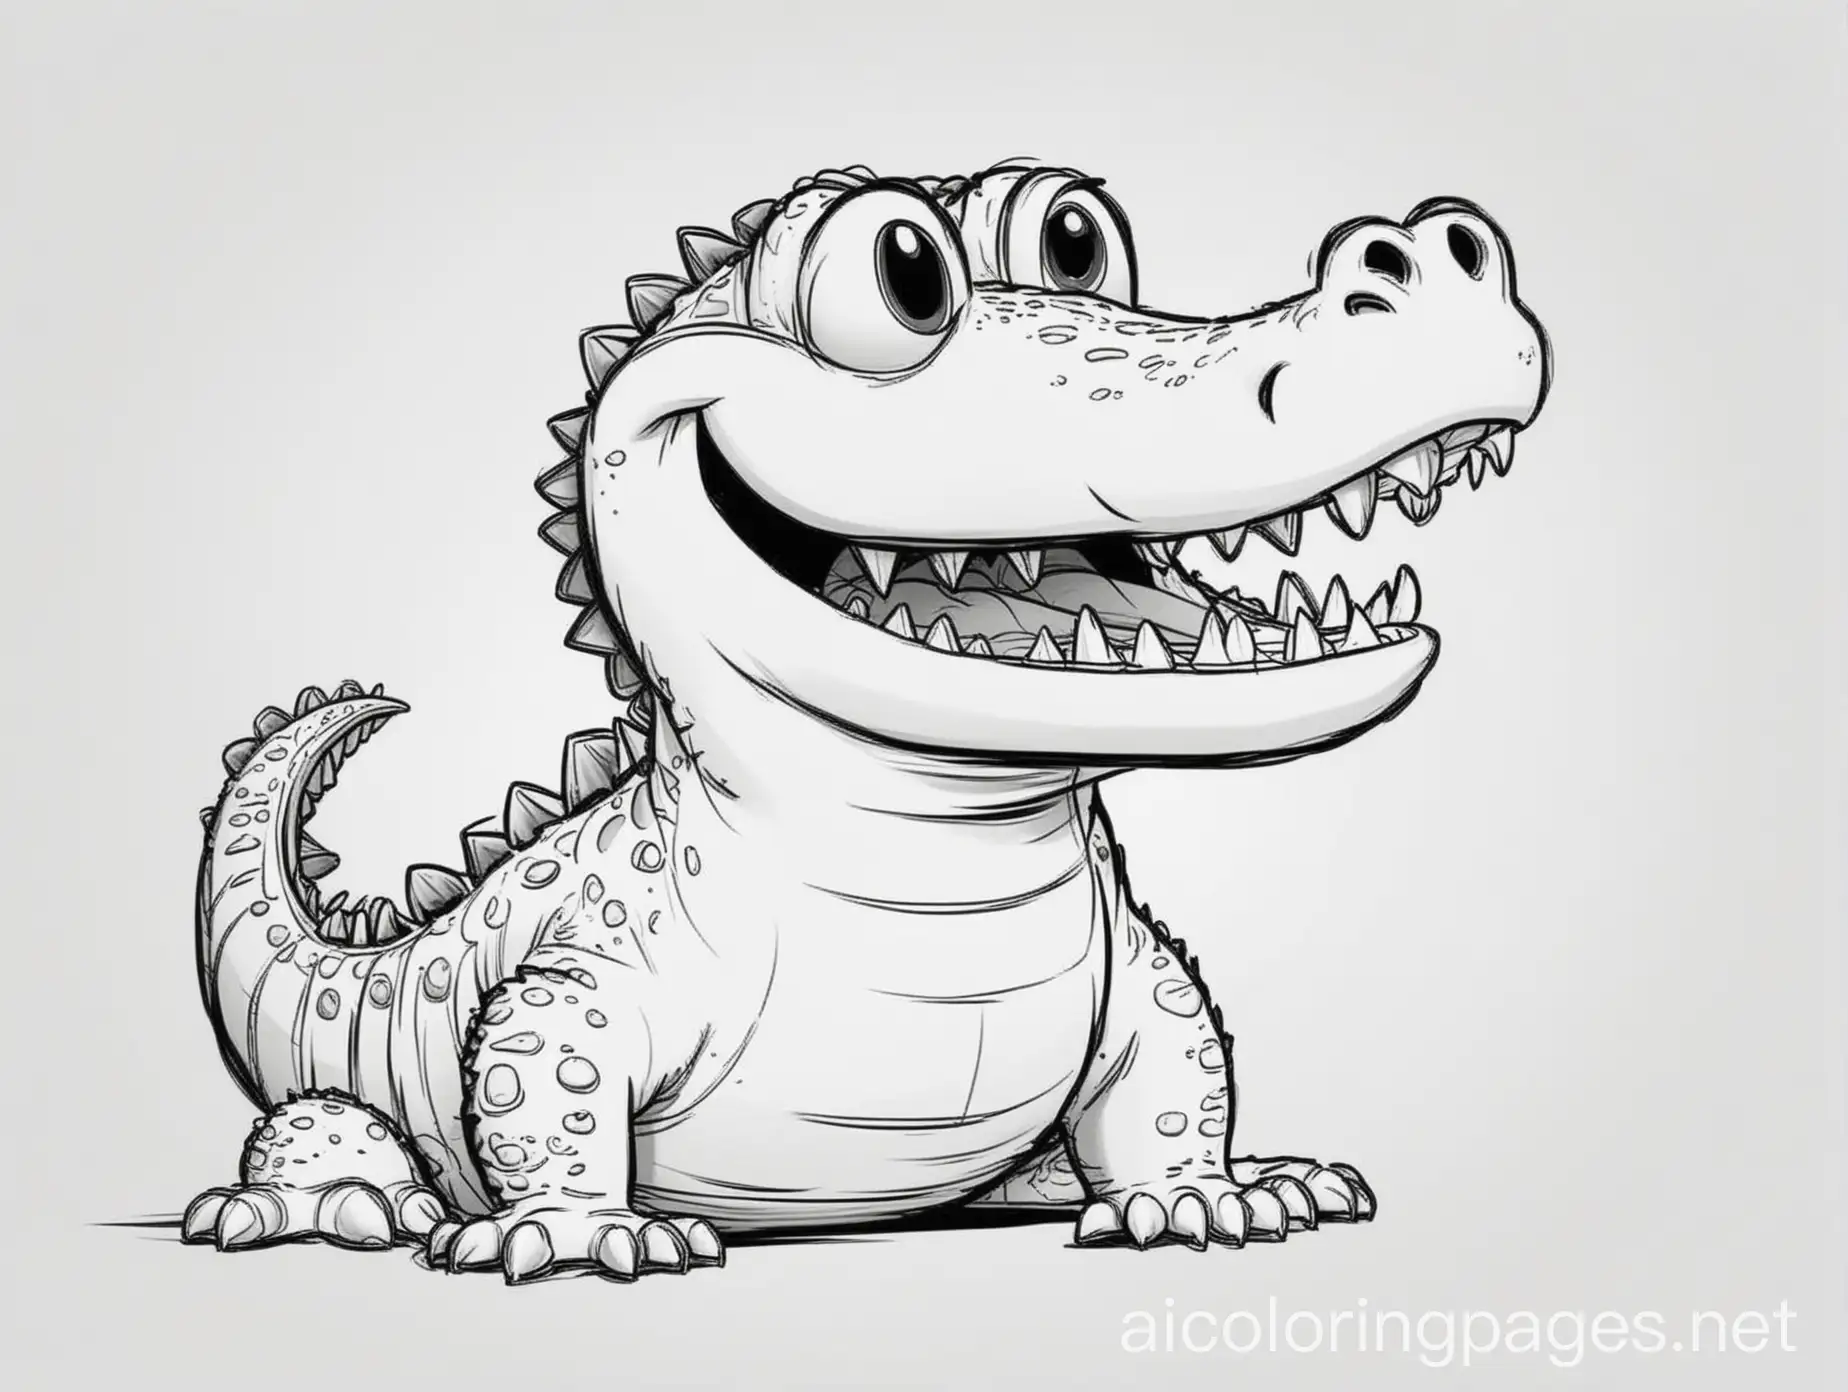 Cheerful-Cartoon-Alligator-Coloring-Page-with-Simplicity-and-Ample-White-Space